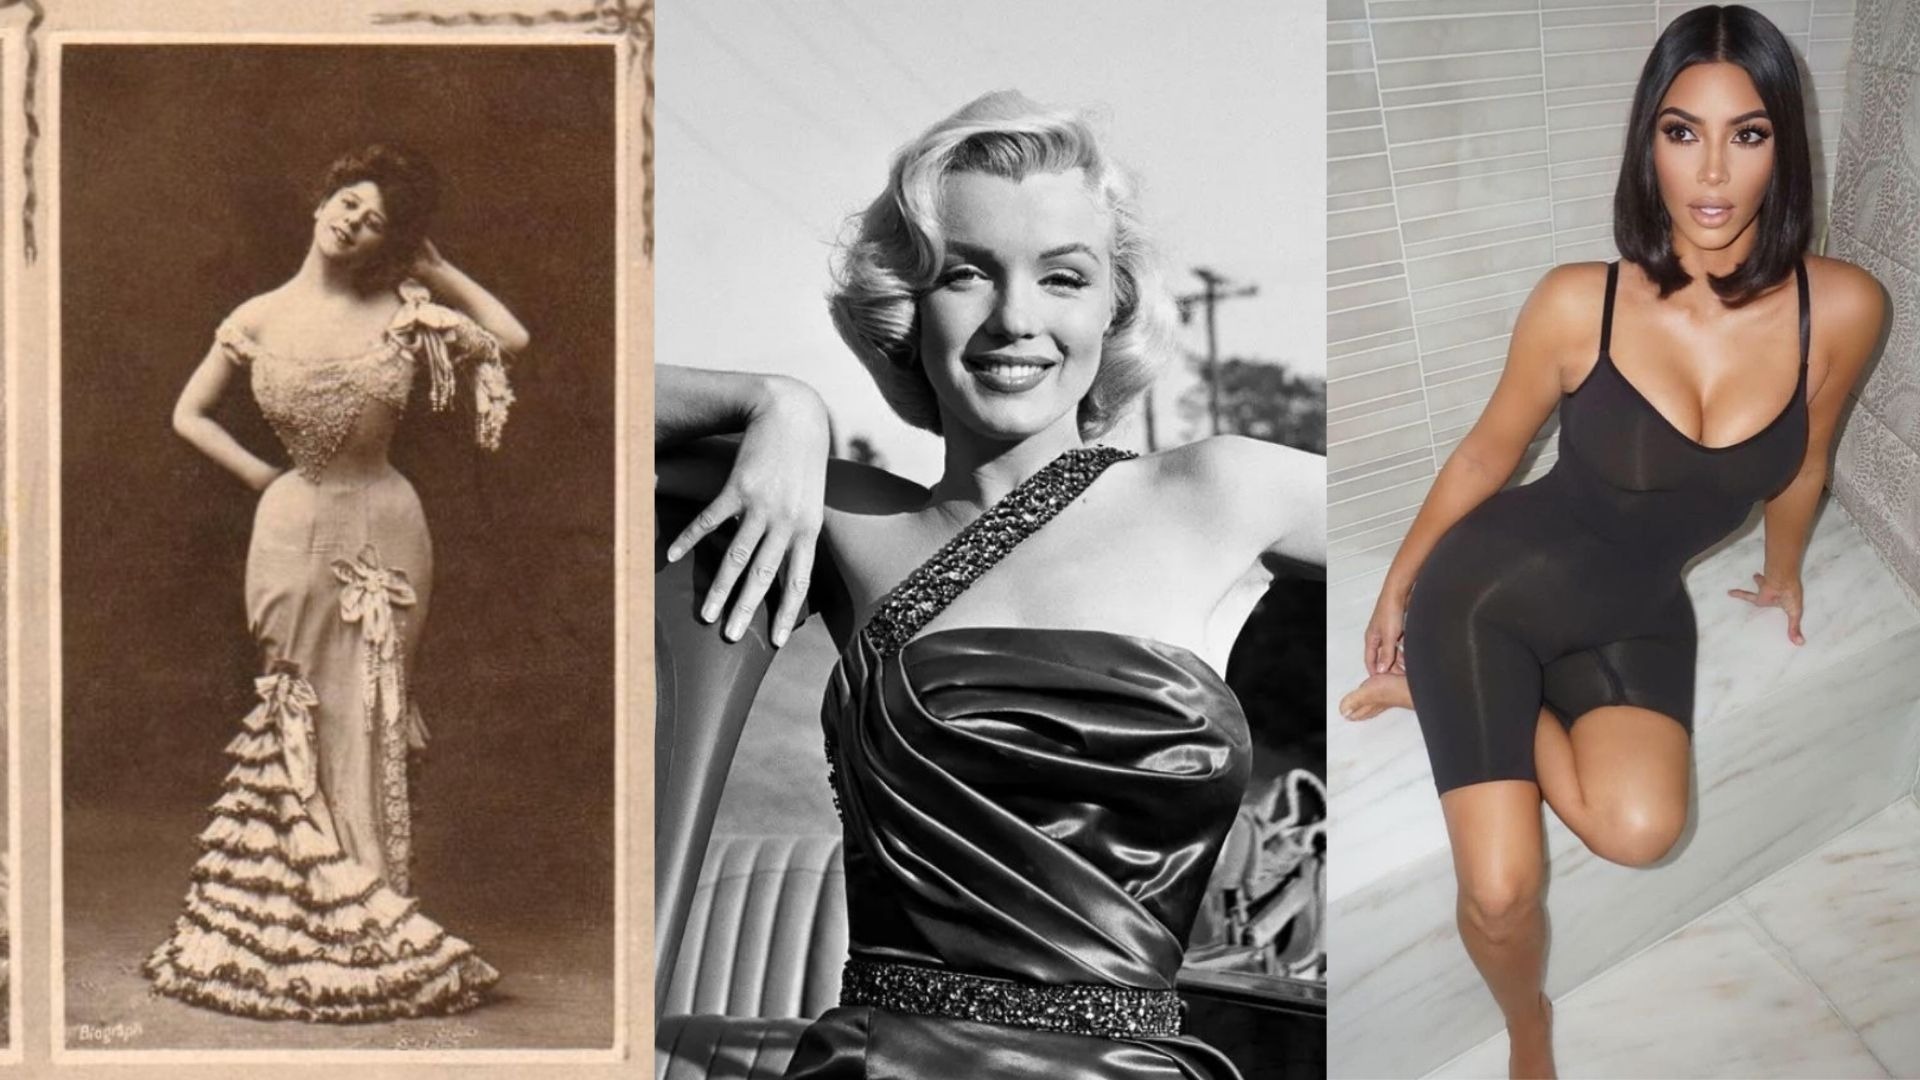 The Evolution of Beauty Standards: A Societal Perspective